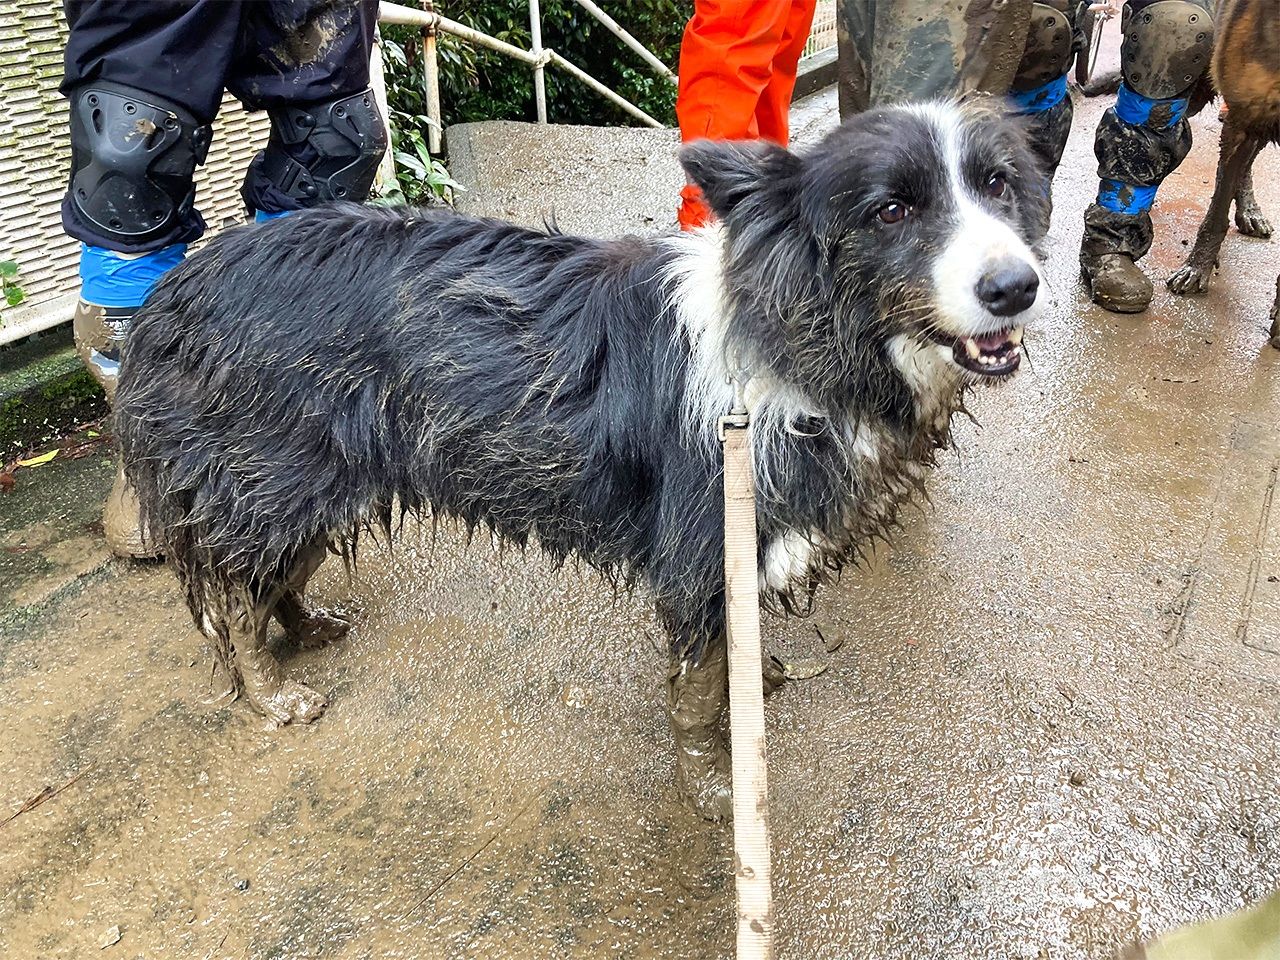 Coco after searching for survivors of the Atami landslide. (Courtesy JRDA Team 7)